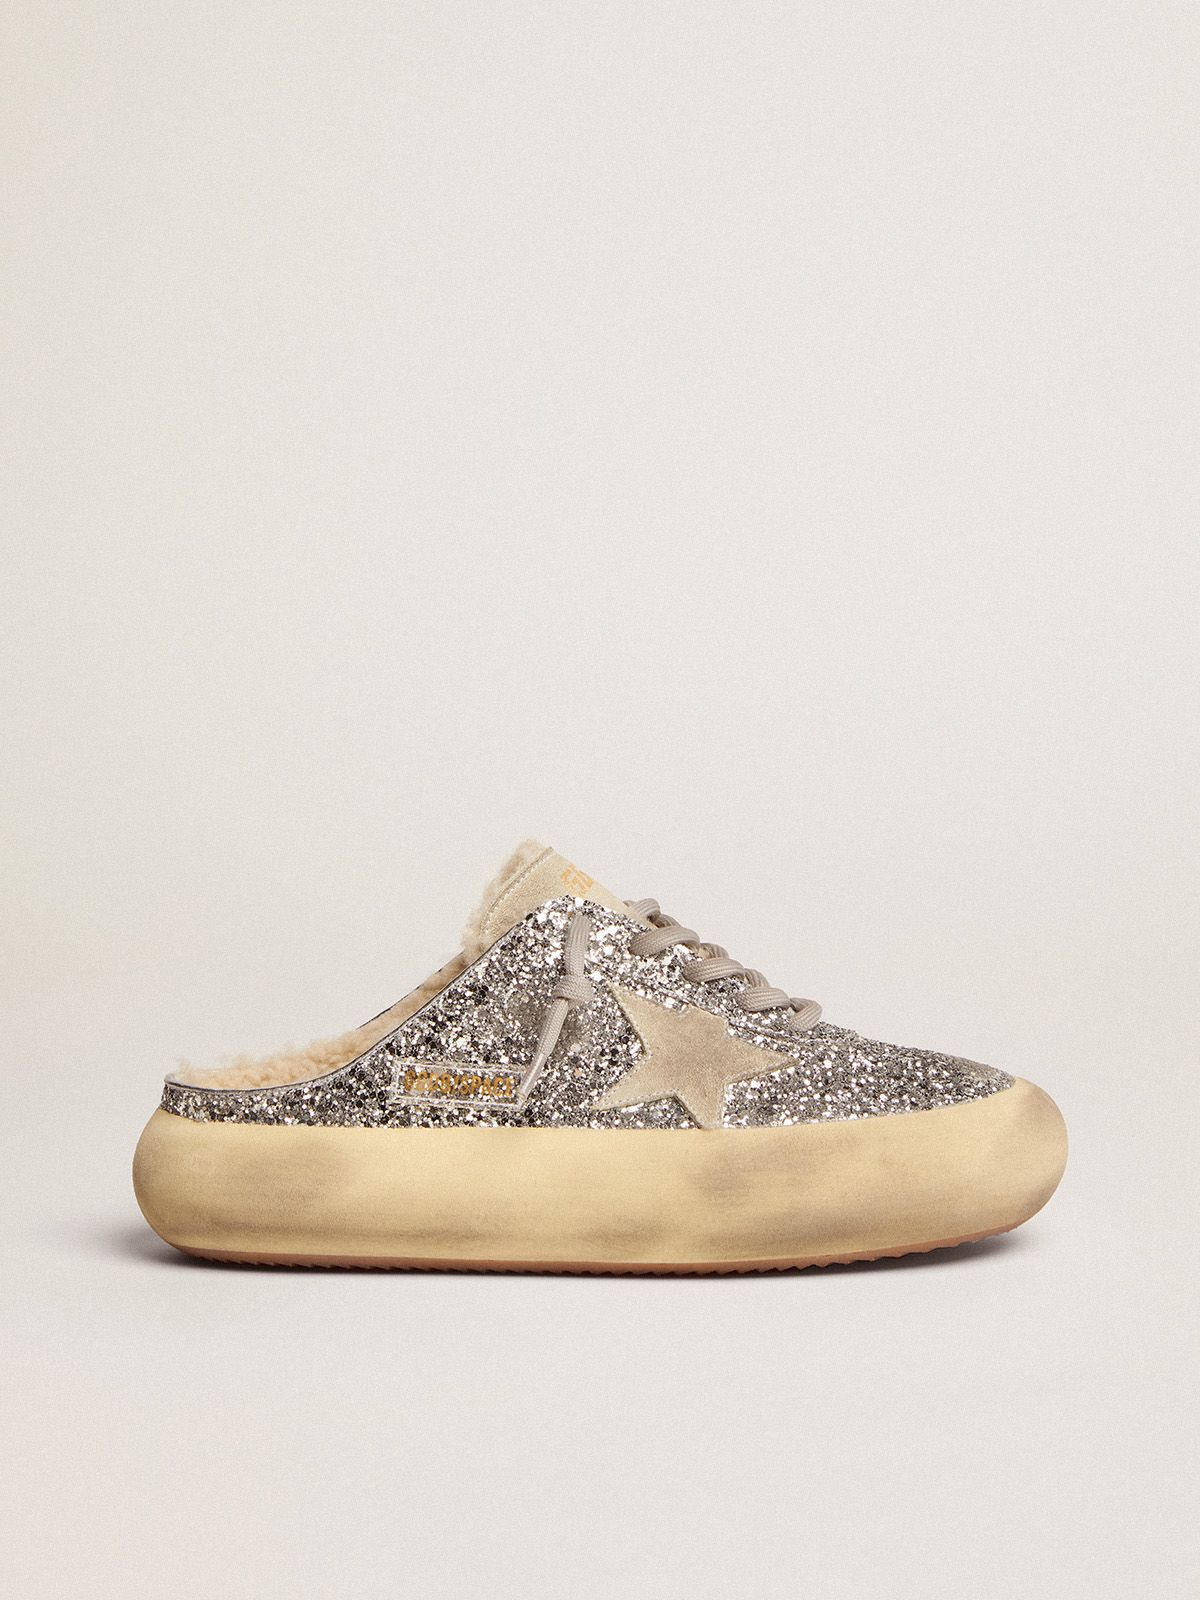 Golden Goose Saldi Space-Star Sabot shoes in silver glitter with shearling lining